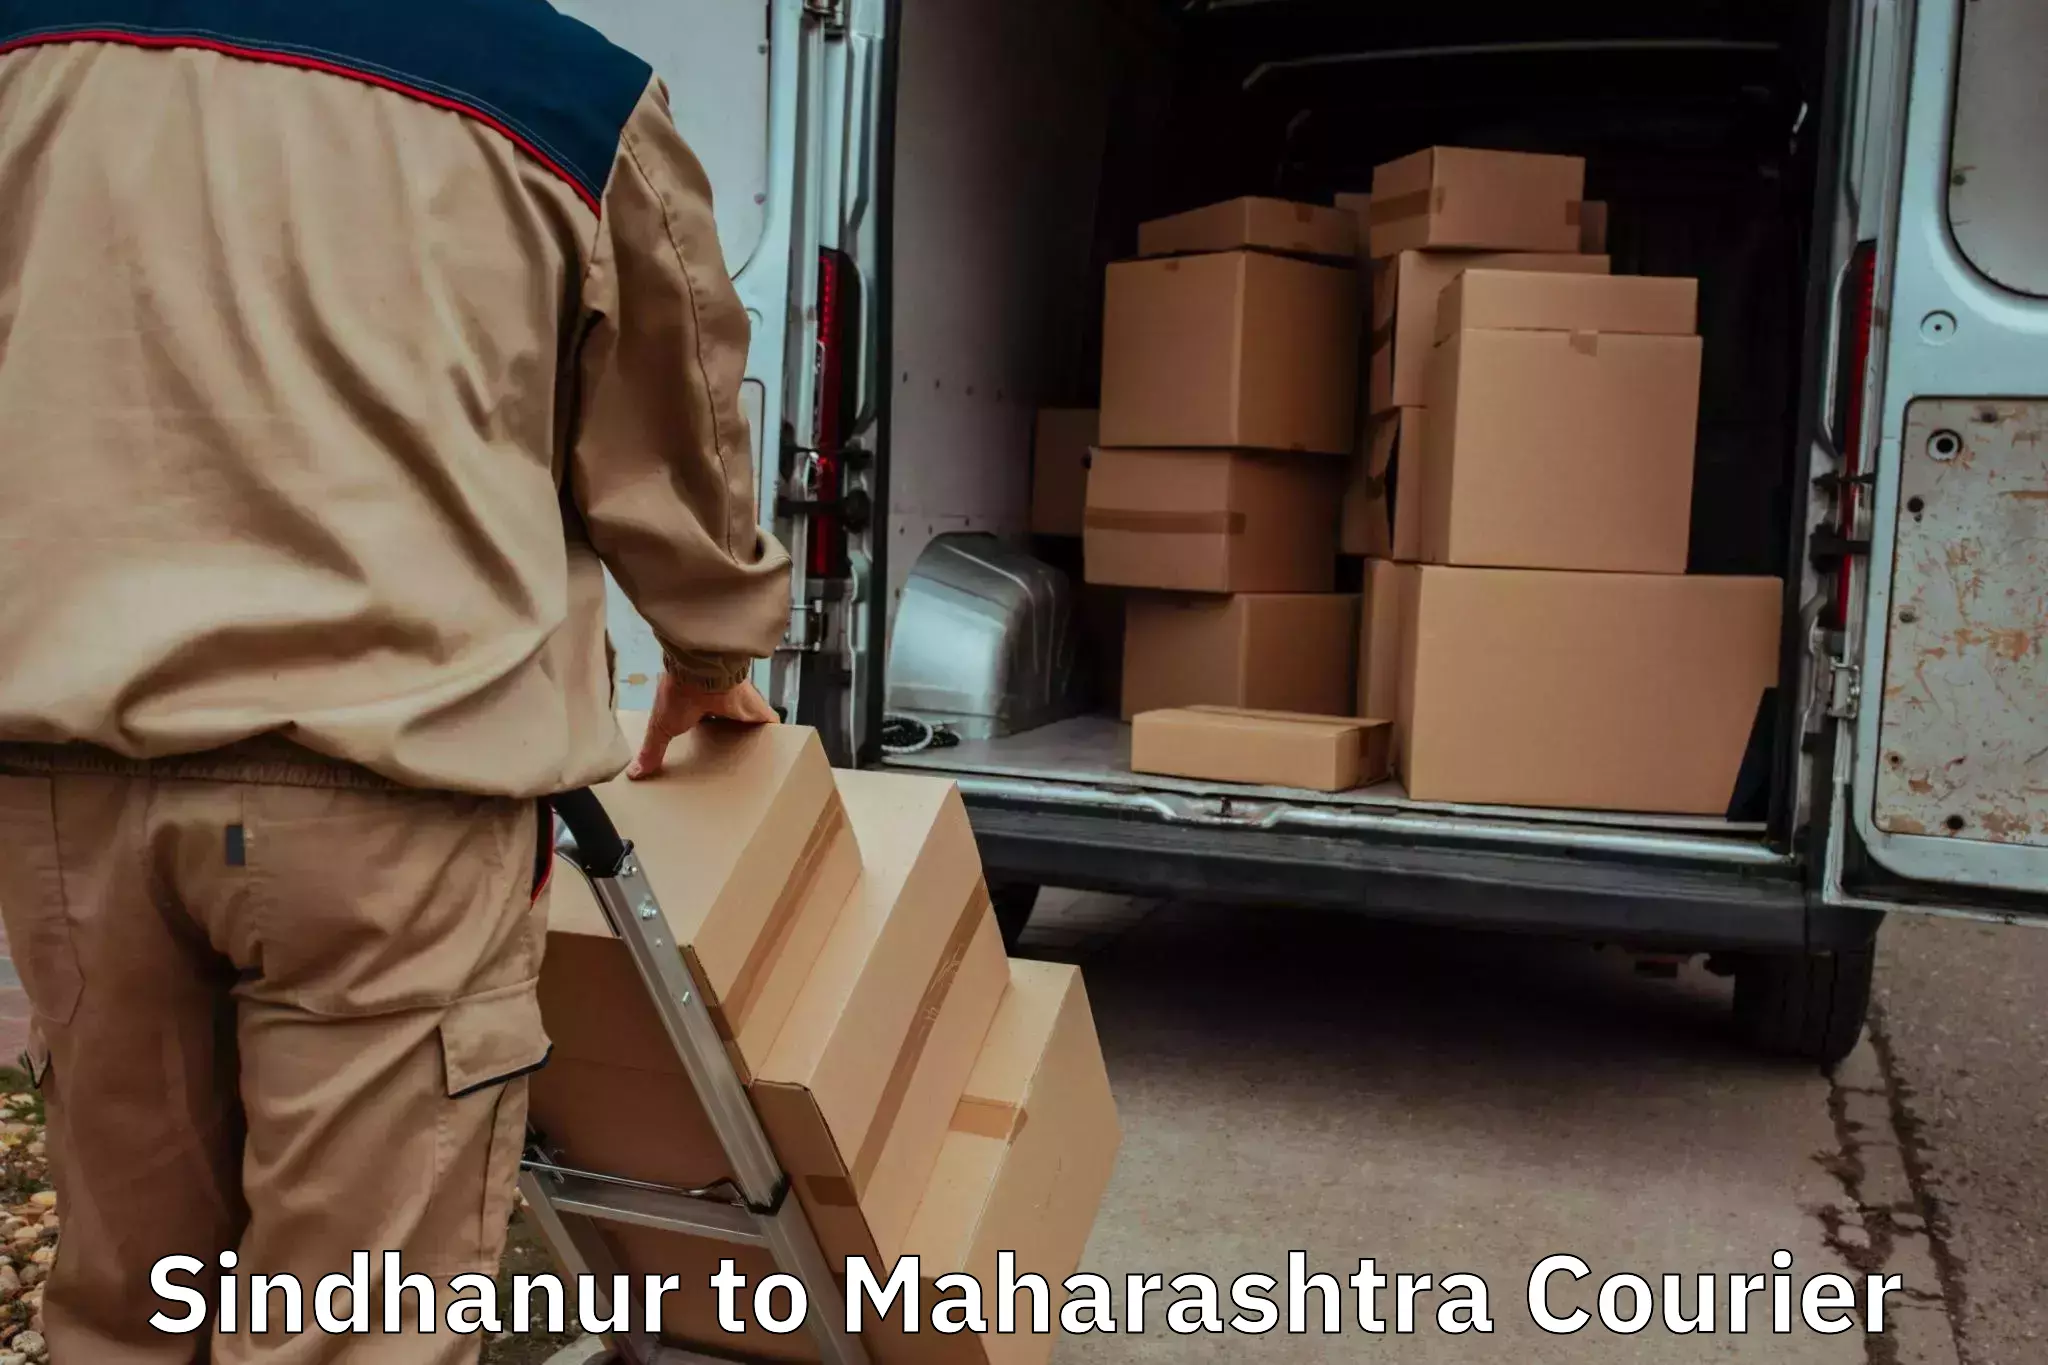 Moving and packing experts Sindhanur to Chandwad